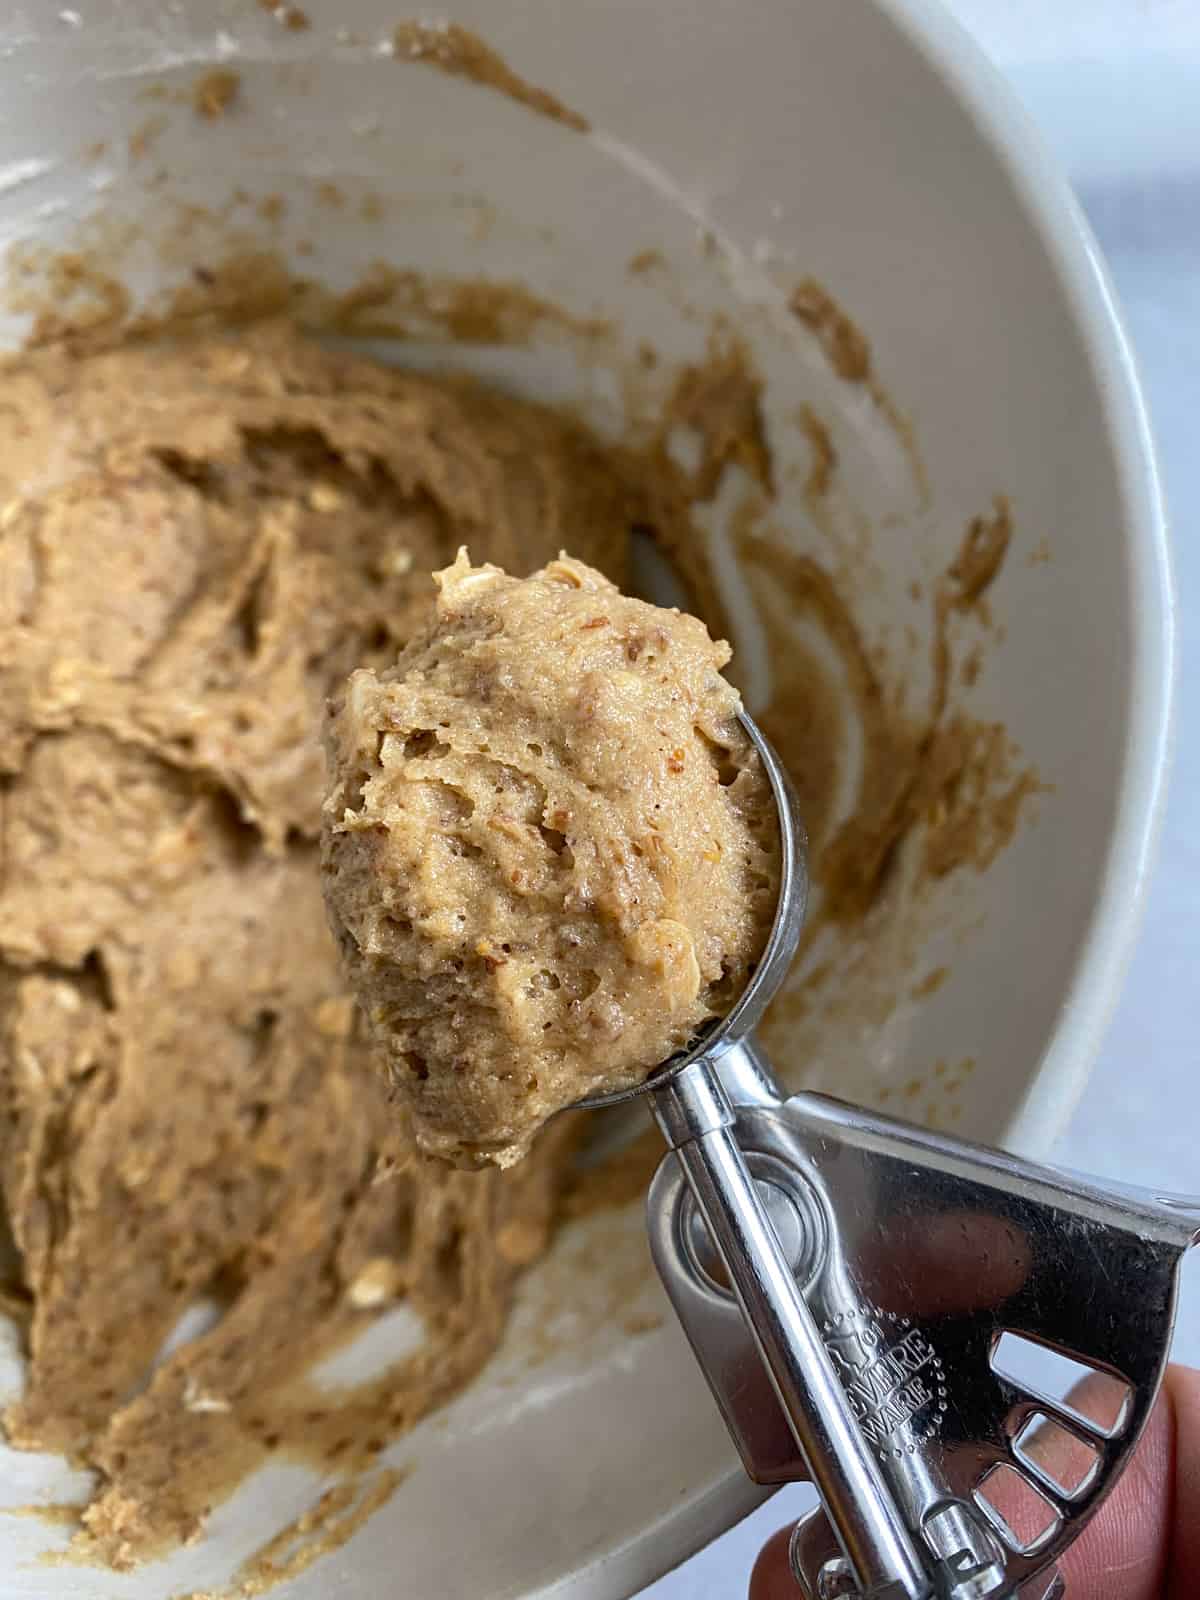 process shot of spooning out peanut butter mixture from bowl